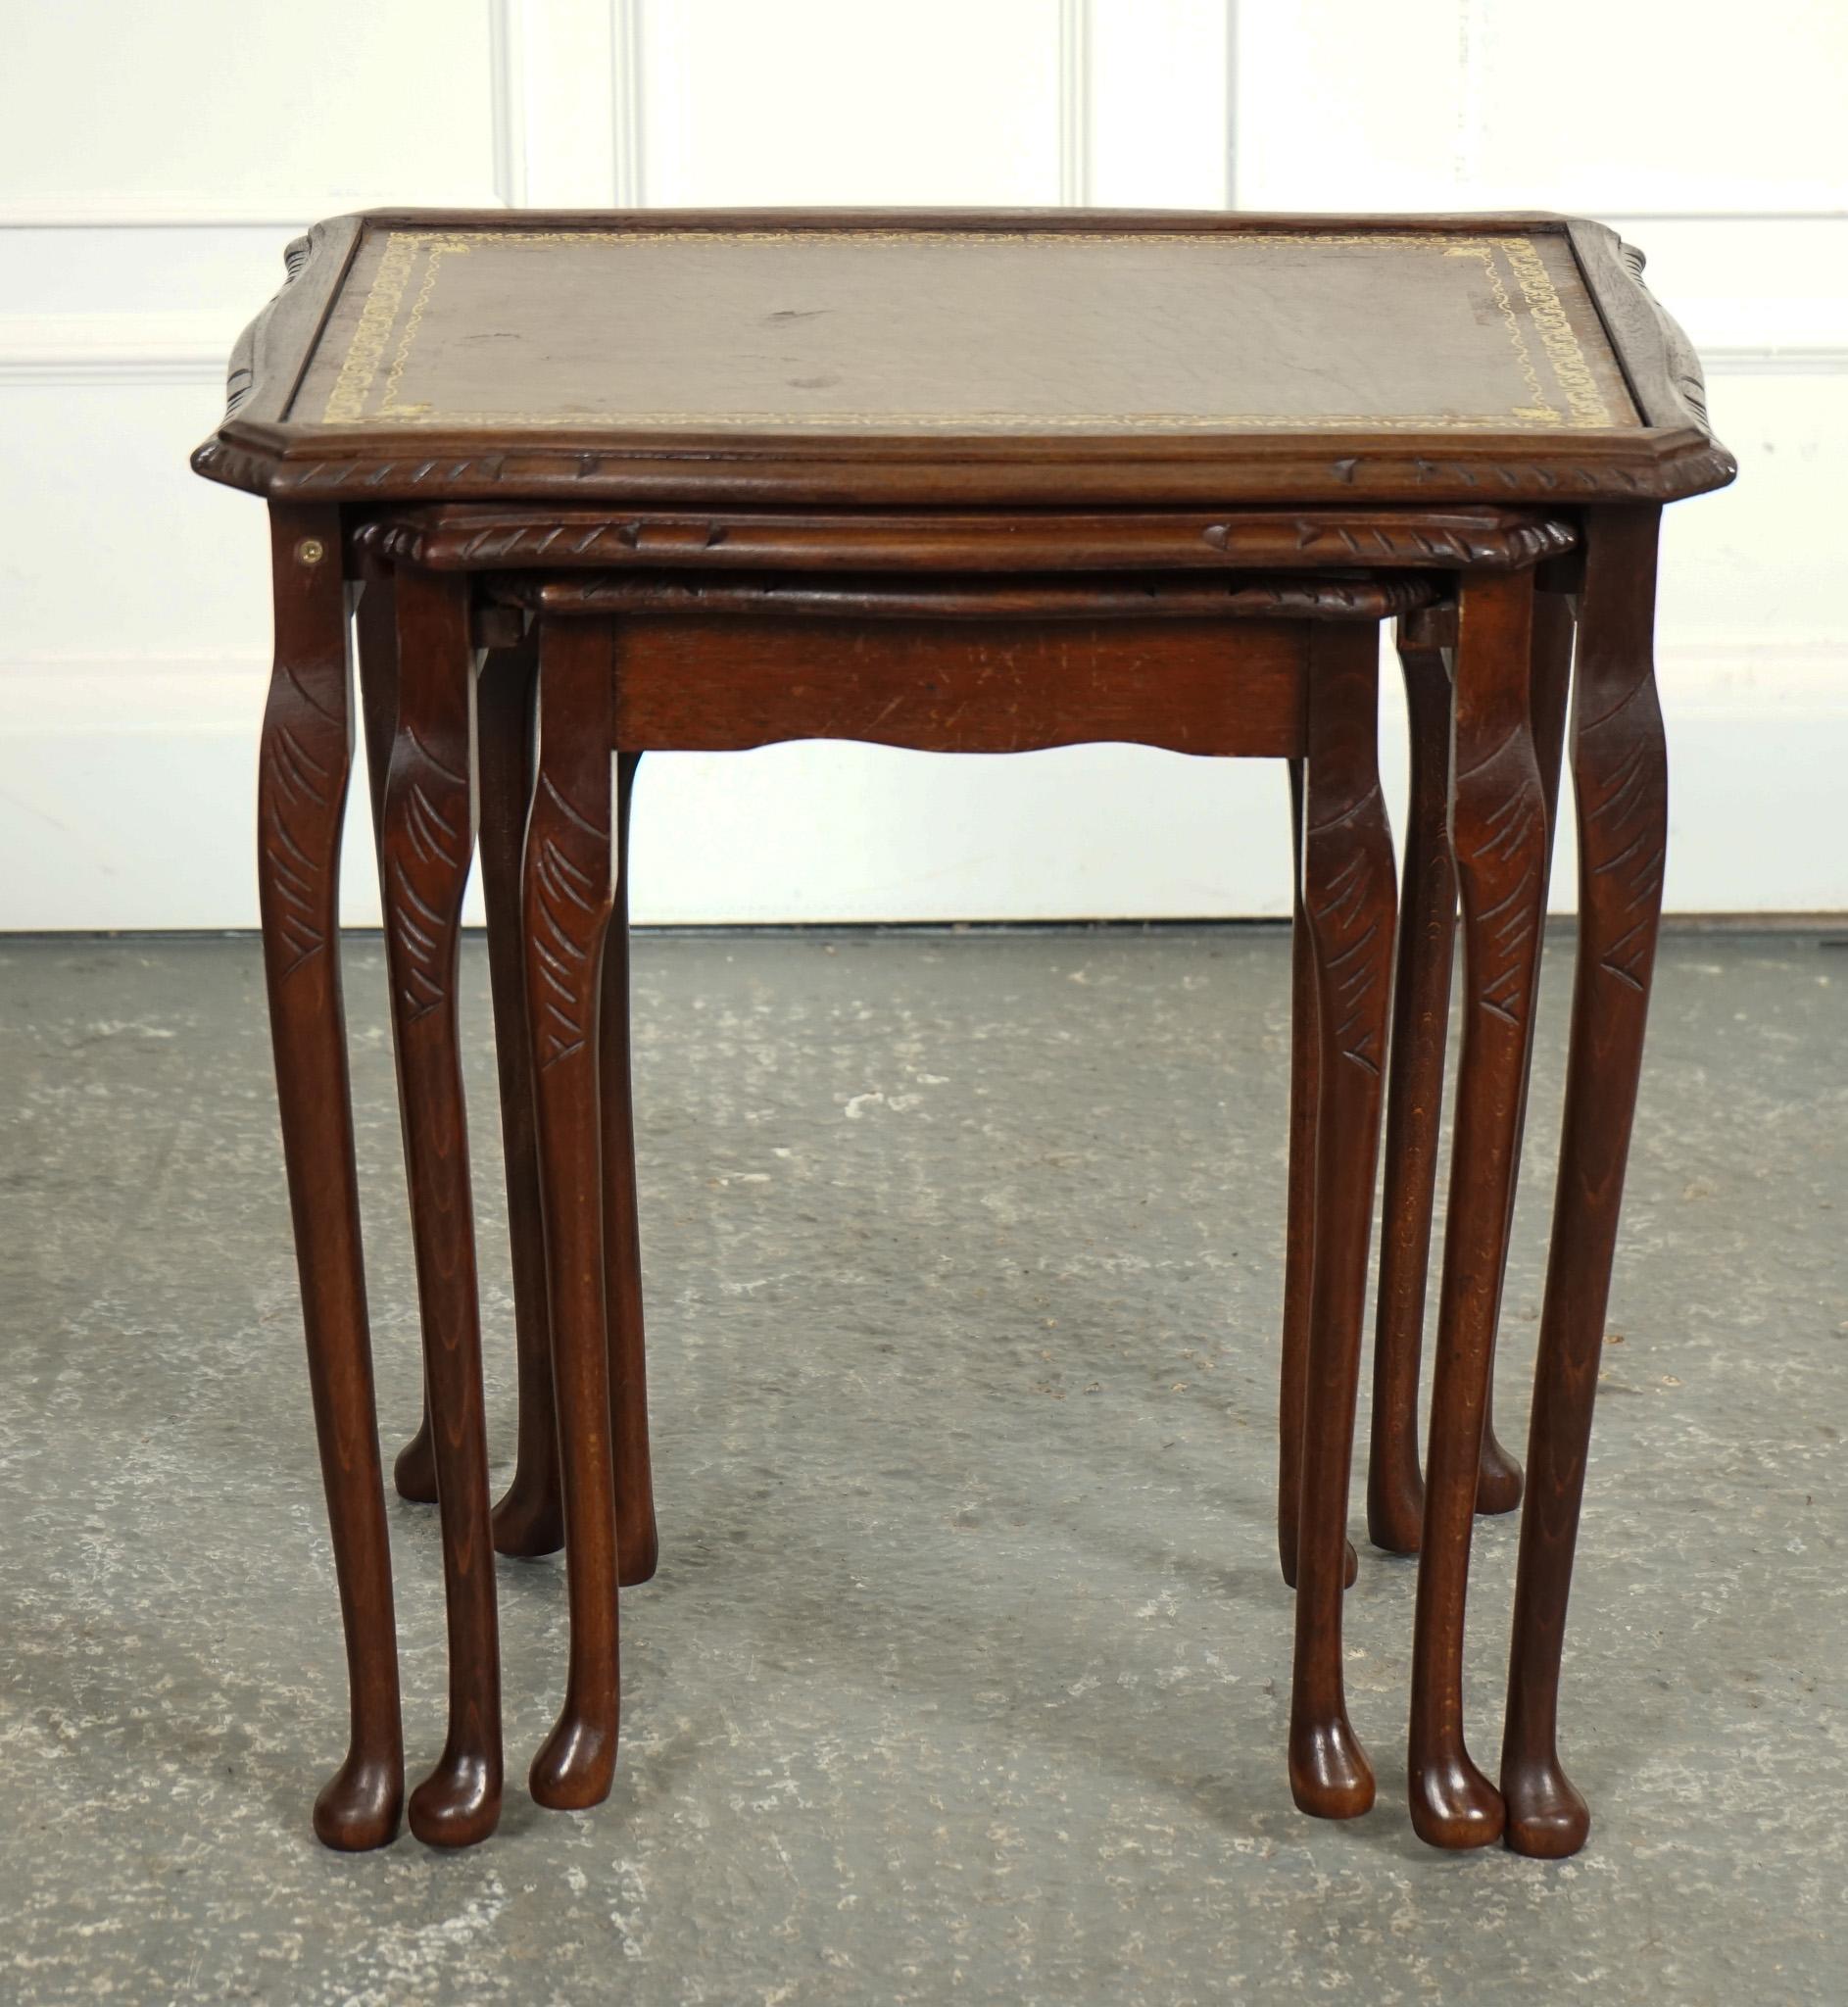 Hand-Crafted VINTAGE NEST OF TABLES QUEEN ANNE STYLE LEGS WiTH BROWN EMBOSSED LEATHER TOP For Sale